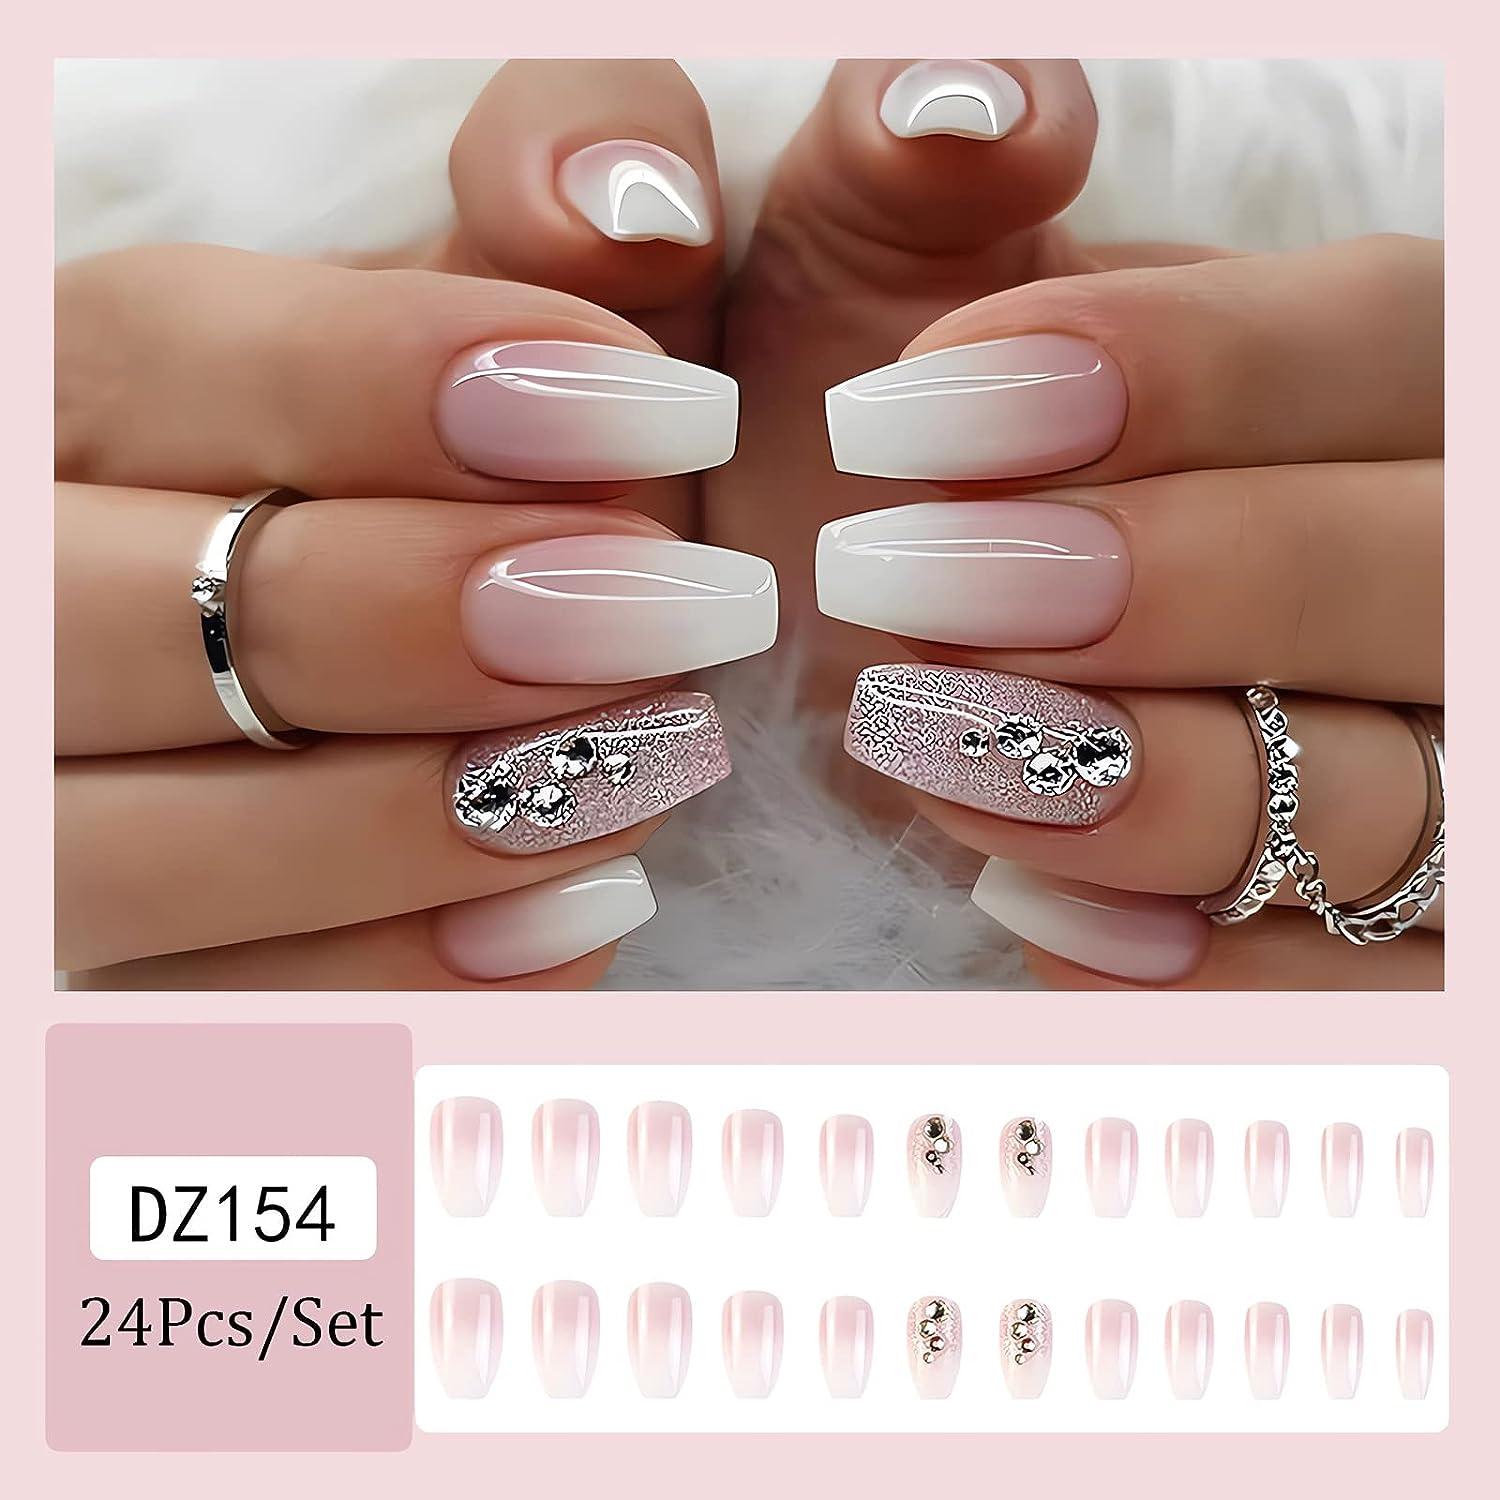  24Pcs Designs Rhinestone Nails Red Coffin Nails with